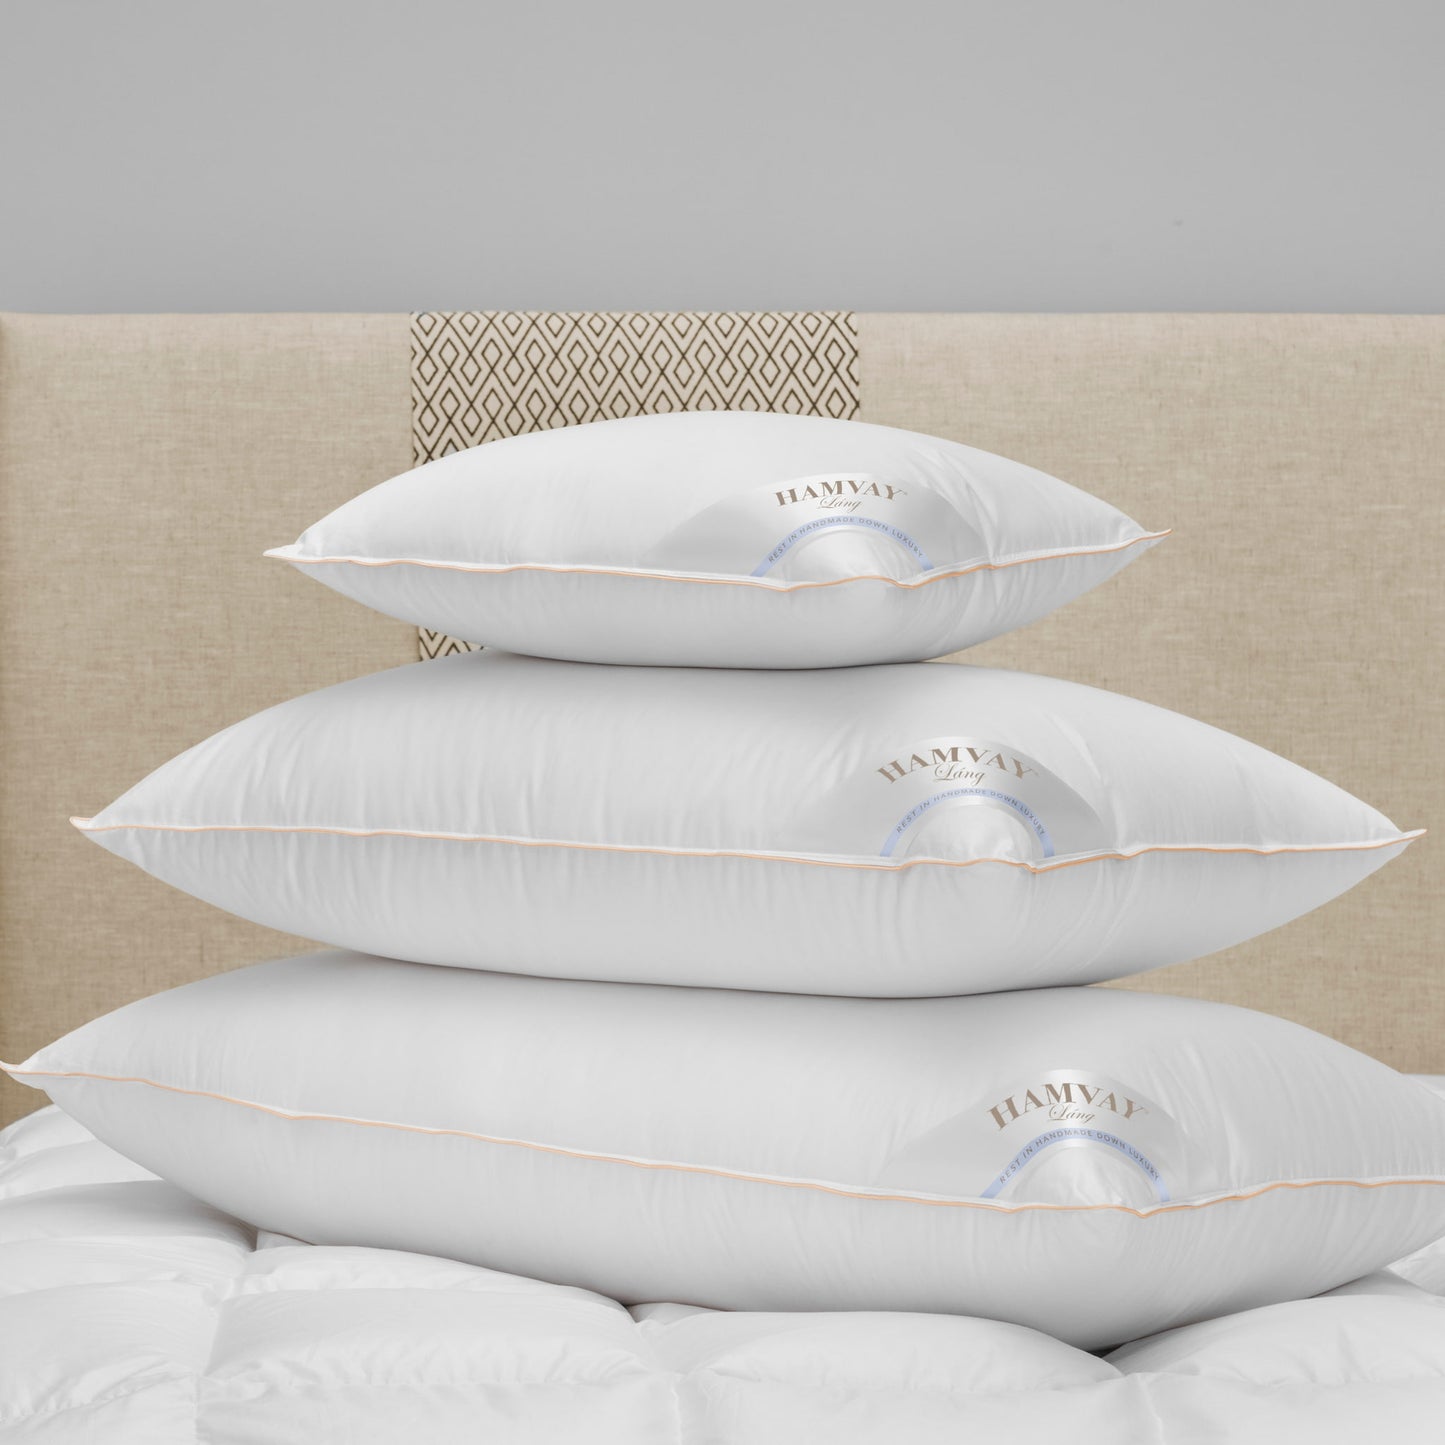 3 sizes of soft luxurious Hungarian goose down pillows on top of each other on a beige bed